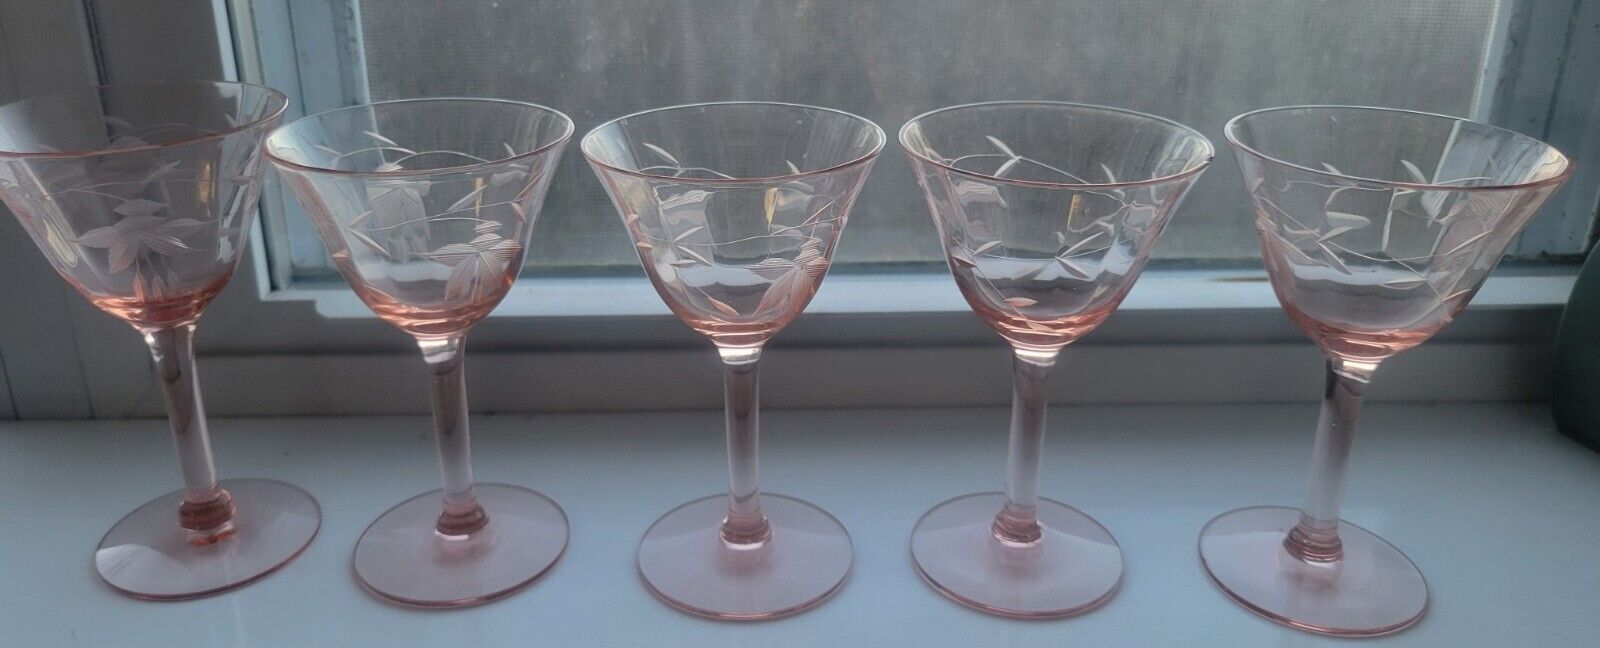 5pc Tiffin Franciscan 1930s pink sherry stemware glasses cordials